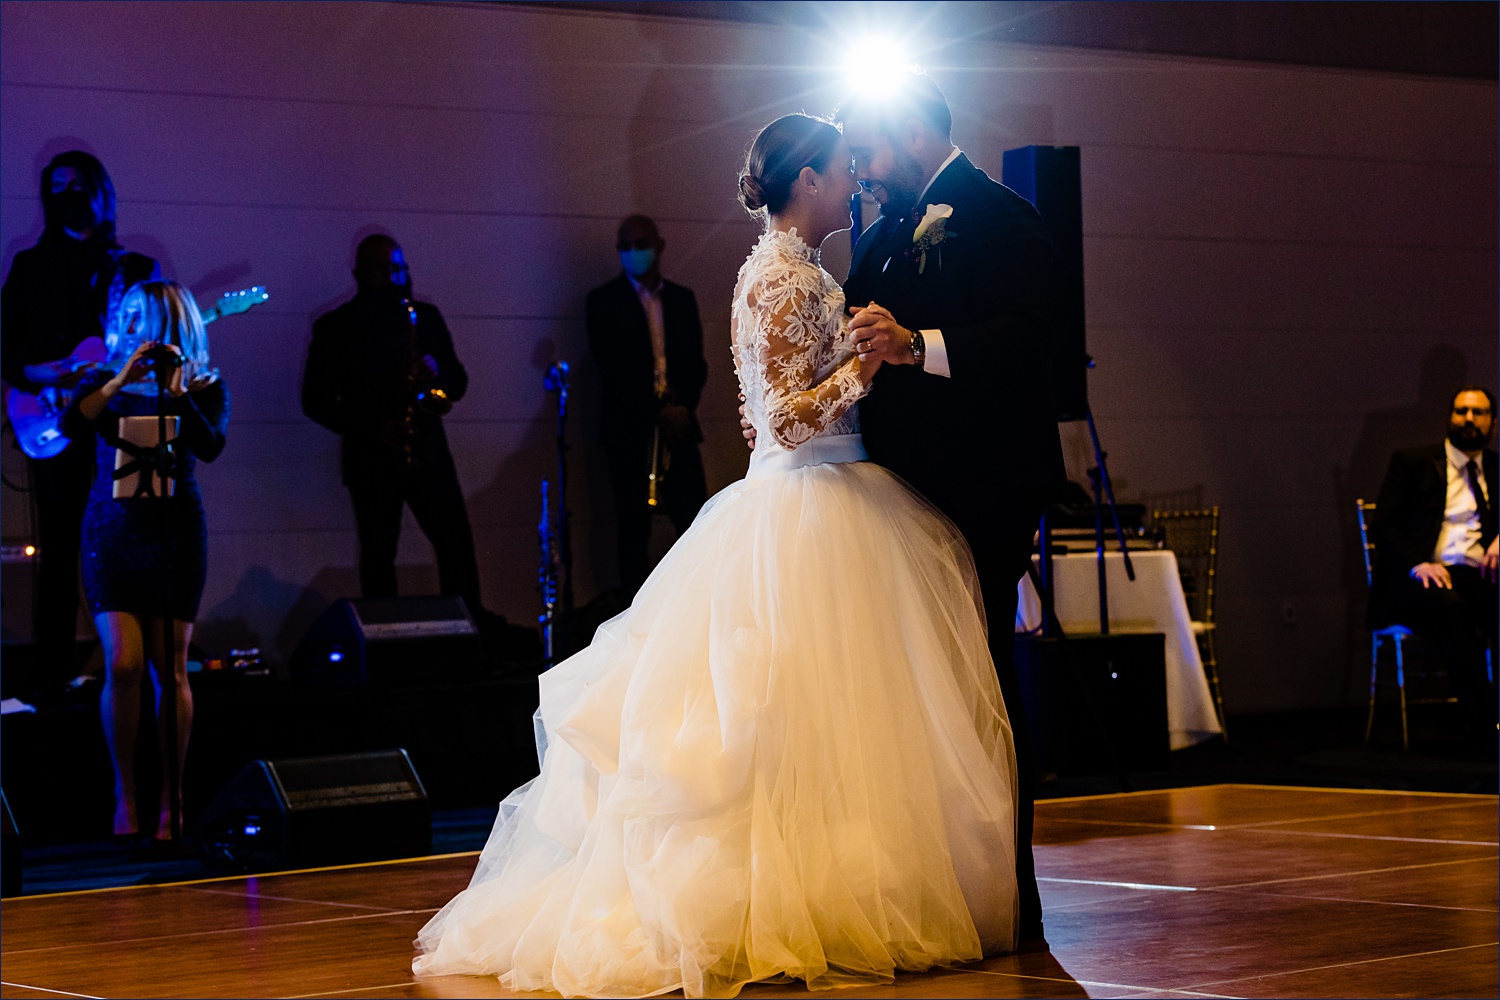 The first dance under the lights at the wedding reception